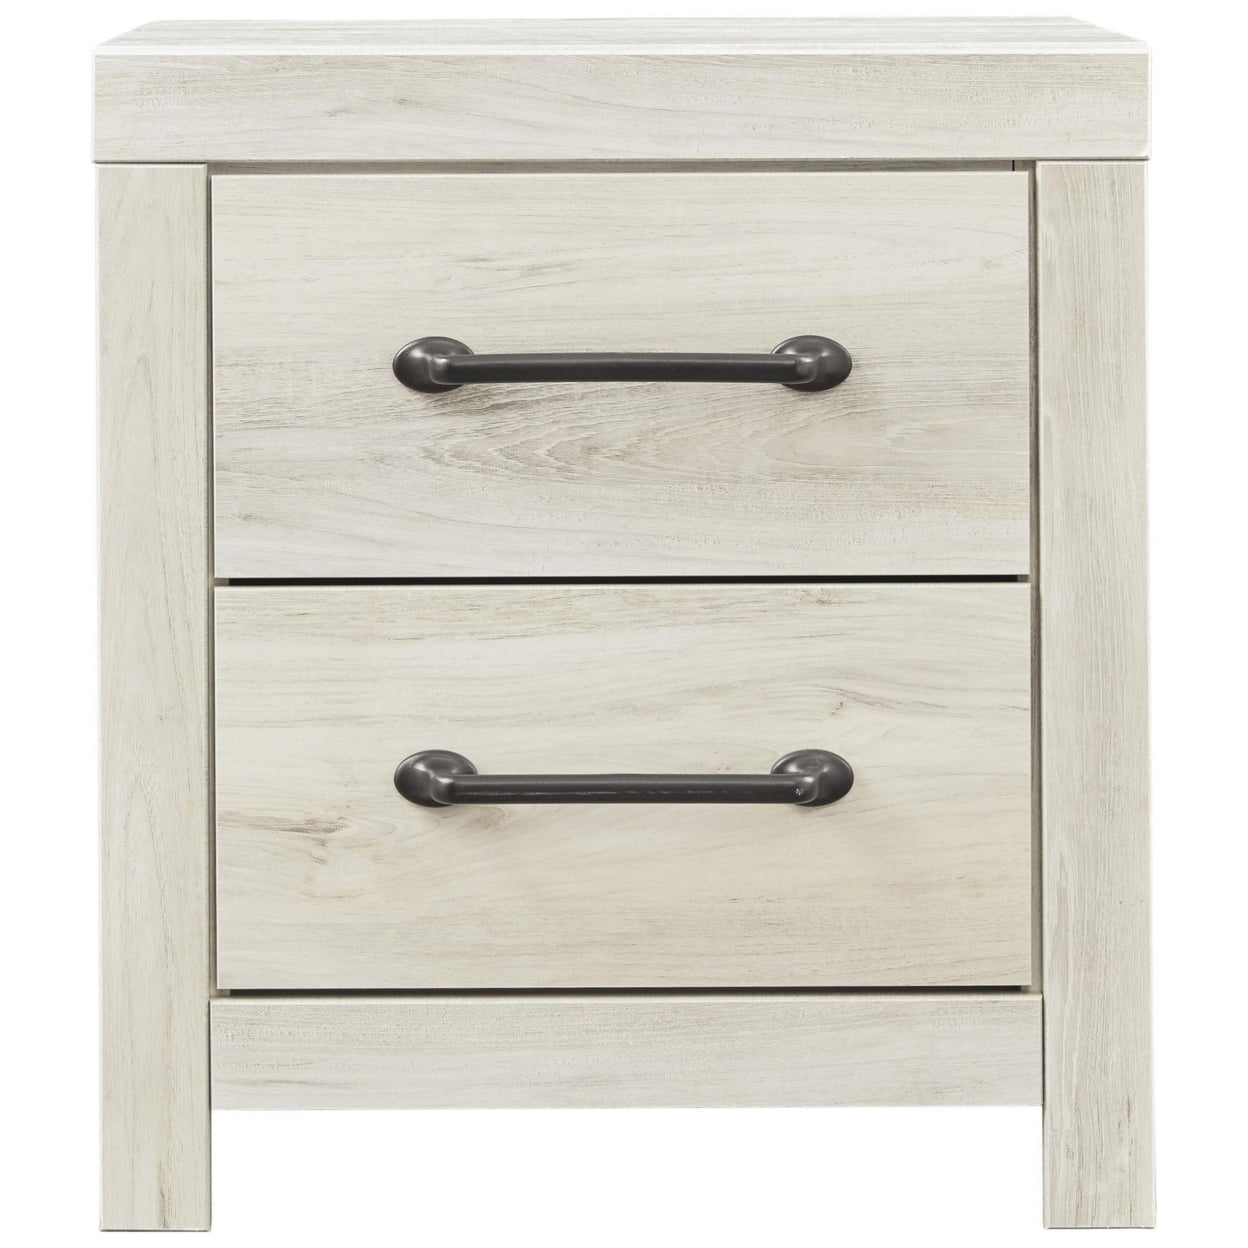 Picture of Benjara BM213351 Transitional Wooden Two Drawer Setup Nightstand with Bar Handles - White